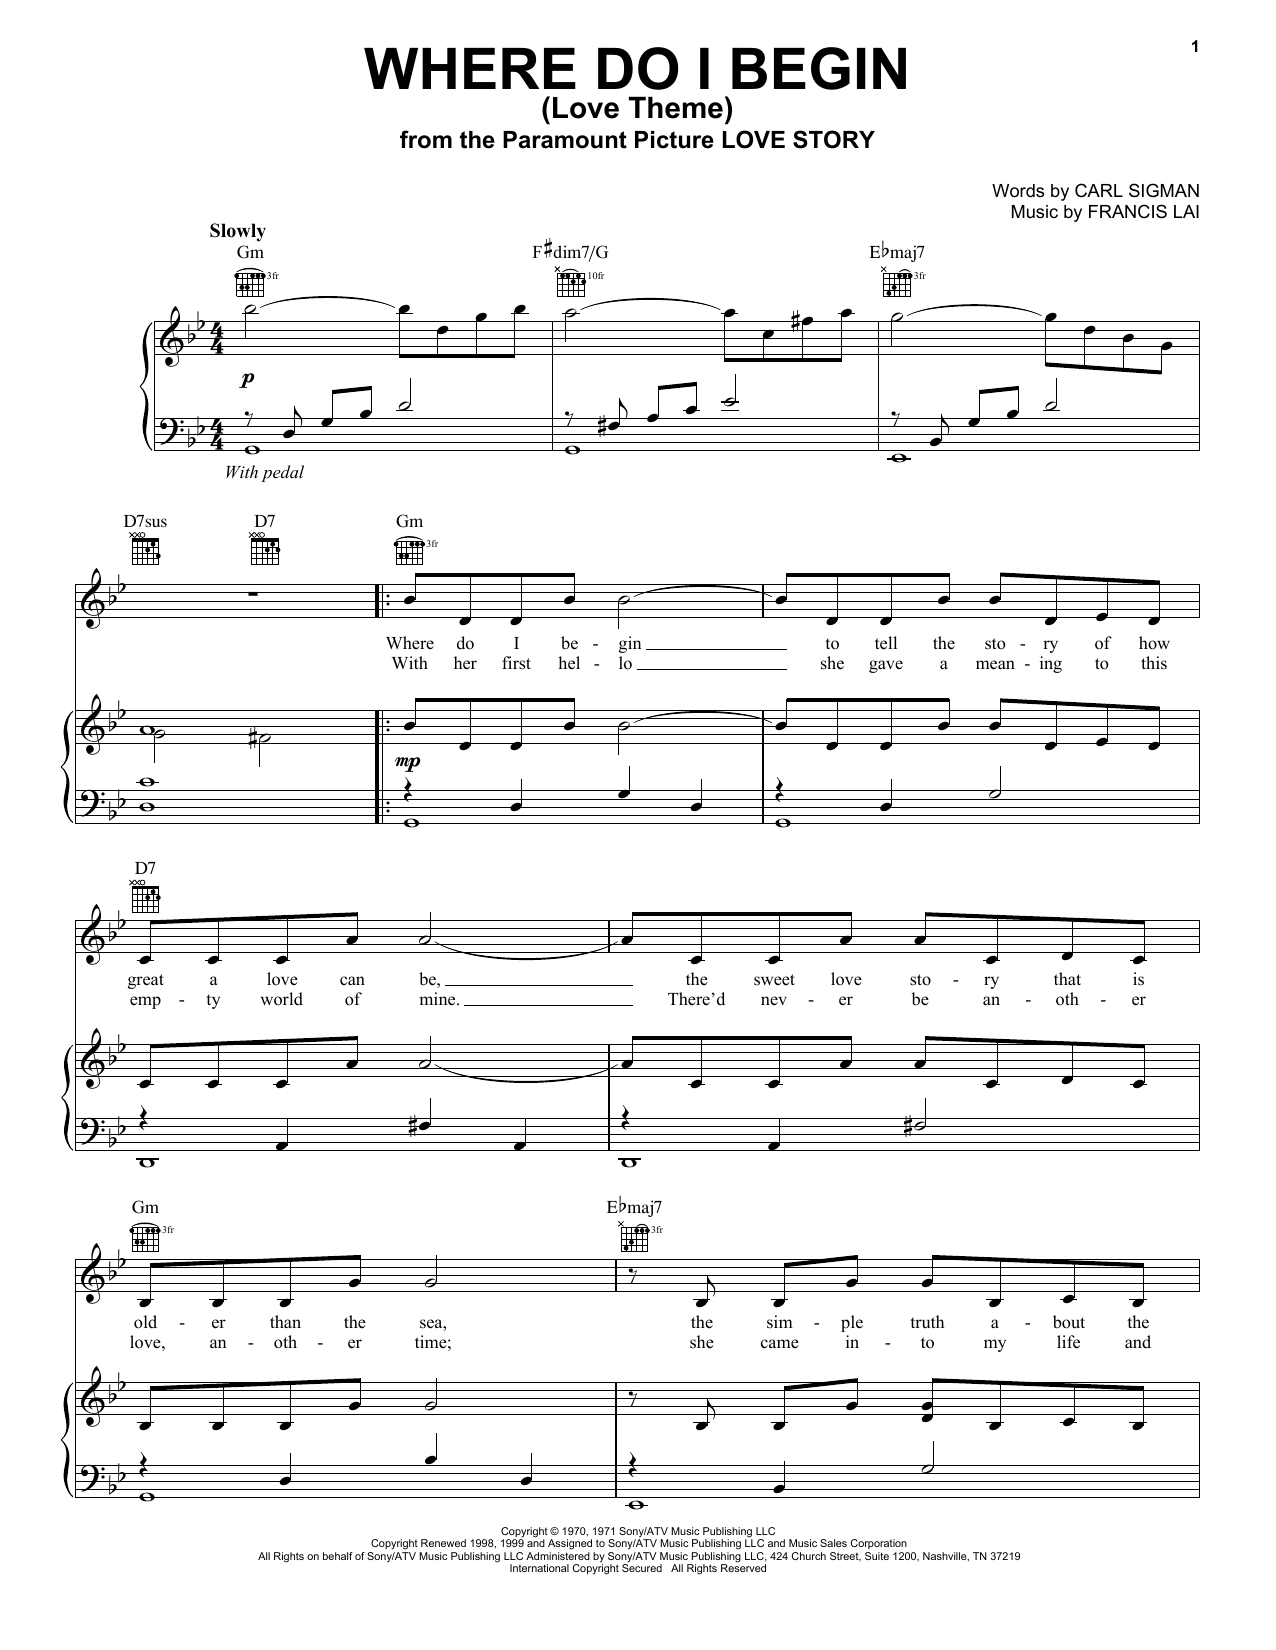 Andy Williams Where Do I Begin (Love Theme) sheet music notes and chords. Download Printable PDF.